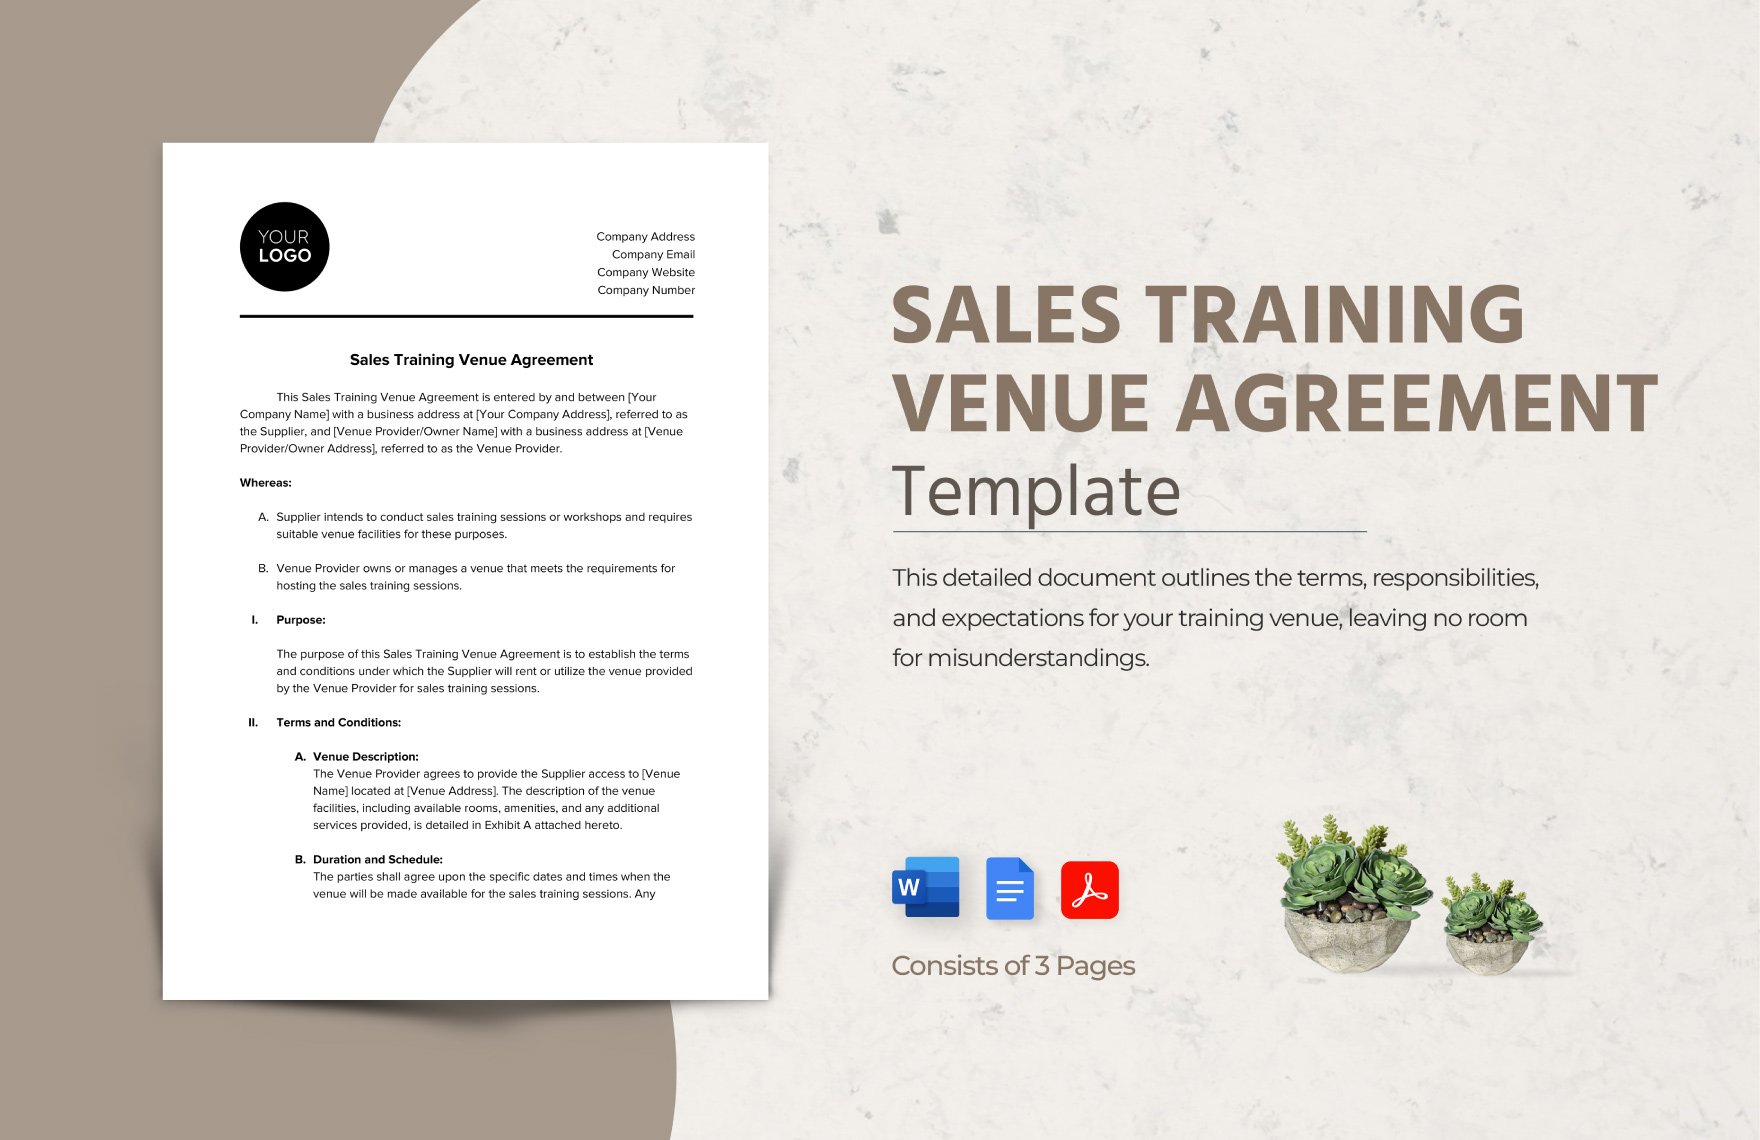 Sales Training Venue Agreement Template in Word, Google Docs, PDF